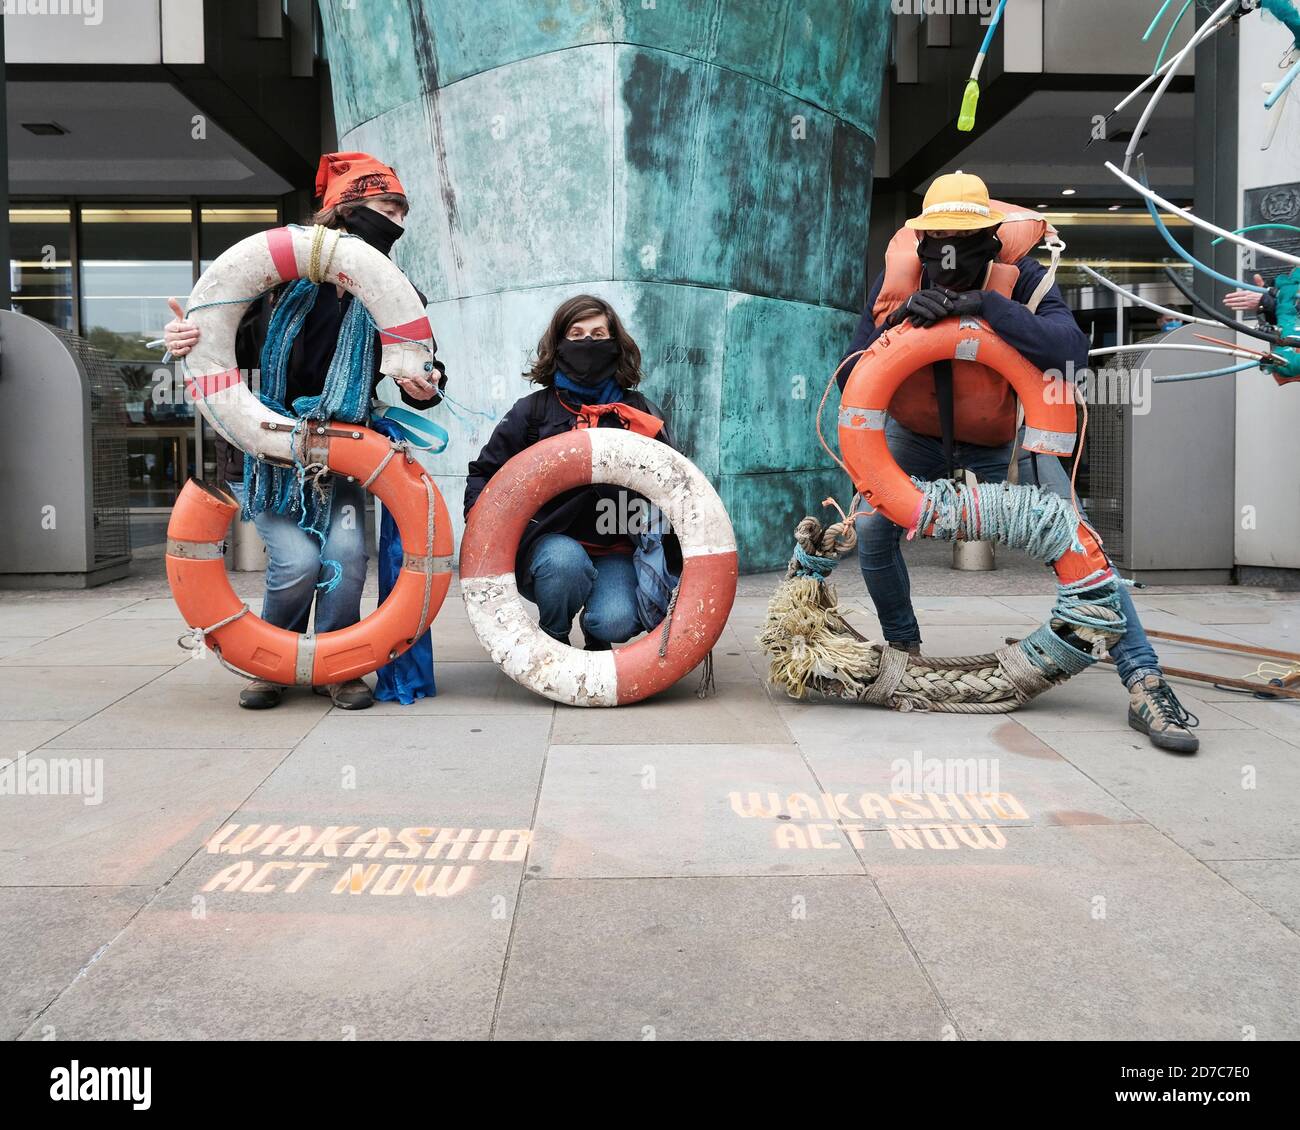 Ocean Rebellion activists protest in London to raise awareness of the Wakashio oil disaster and the use of fossil fuels in the shipping industry. Stock Photo